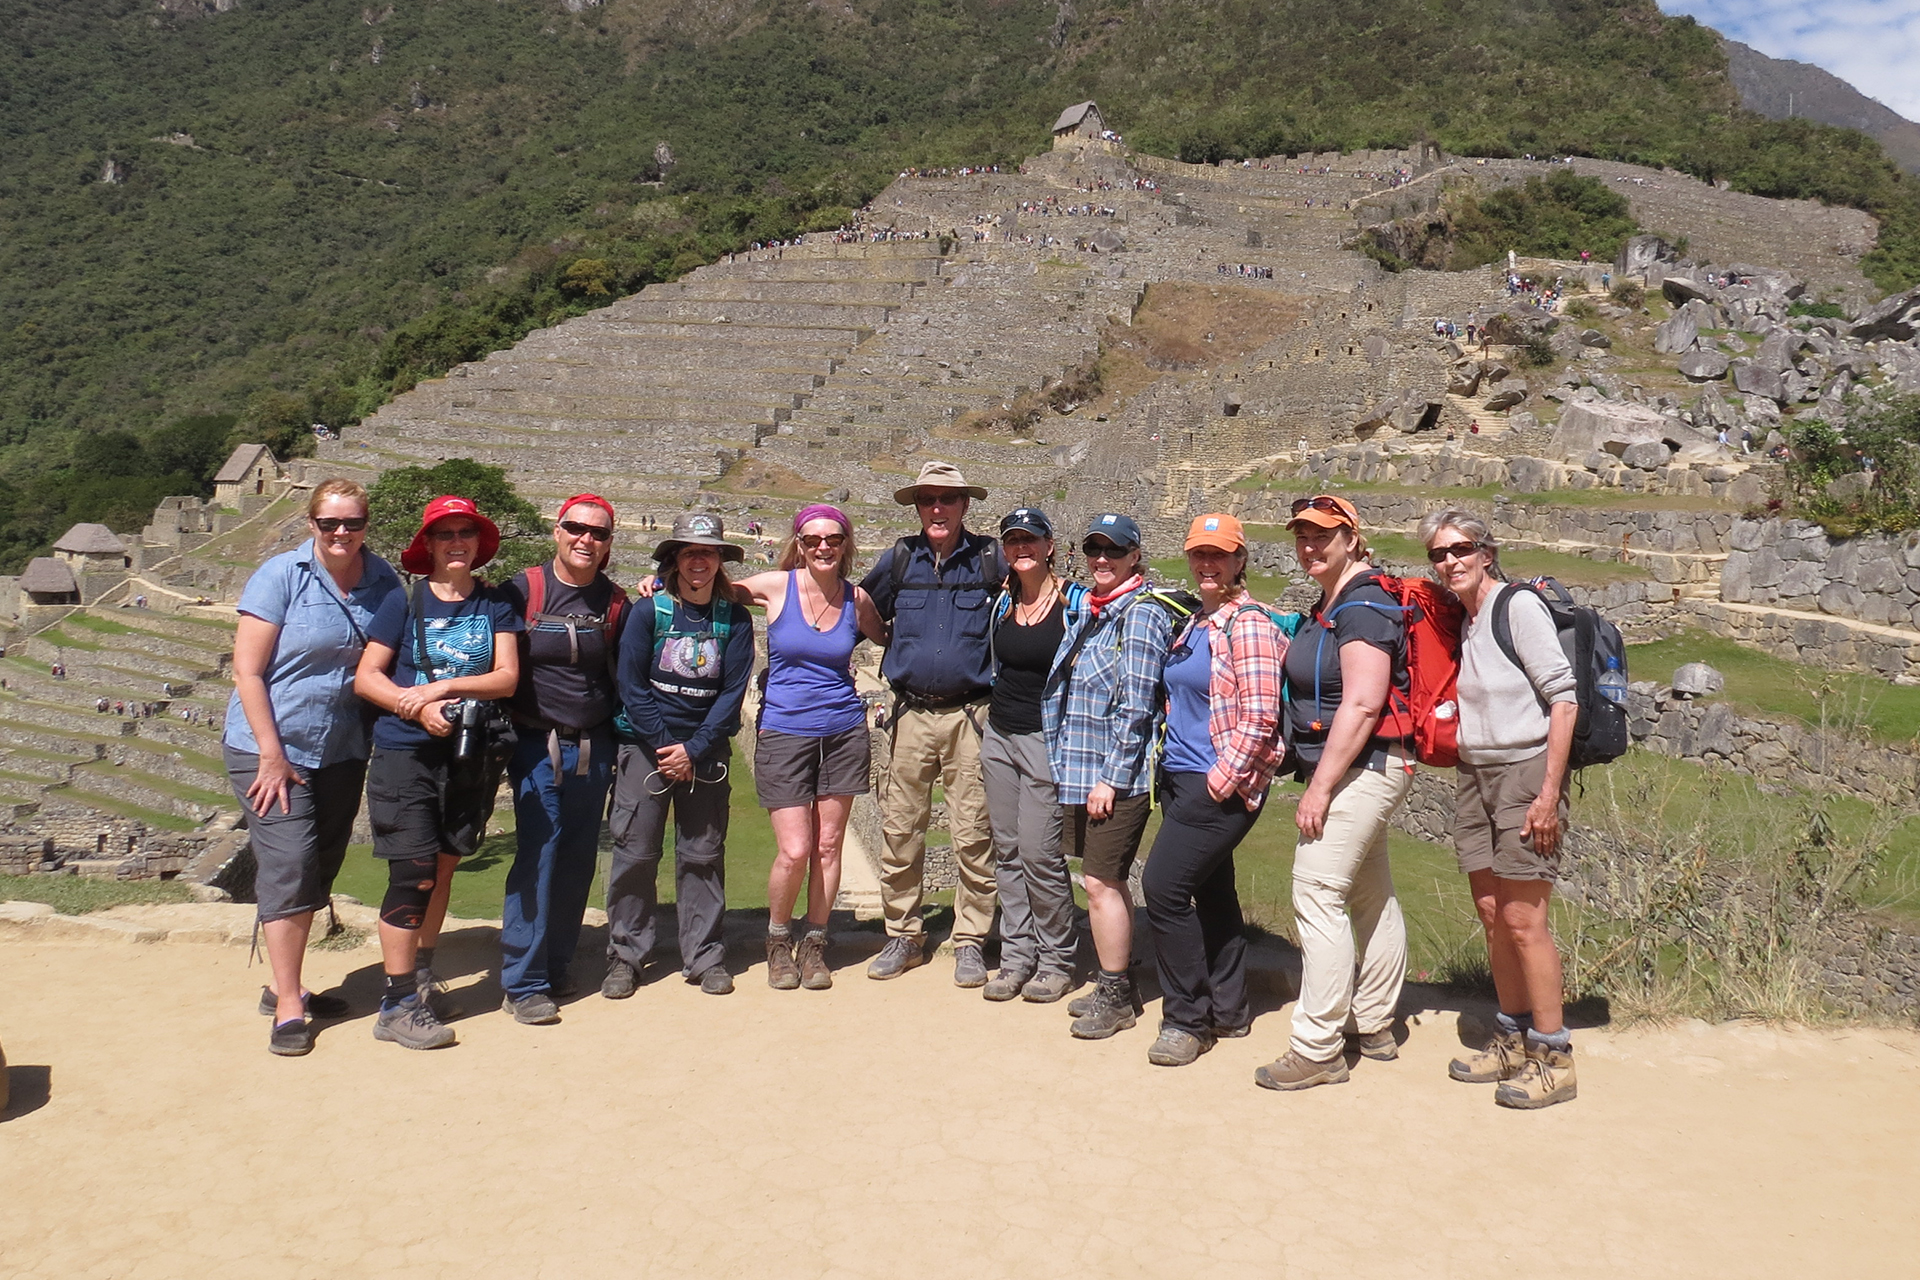 Cathy leading a group trip to Peru in 2018